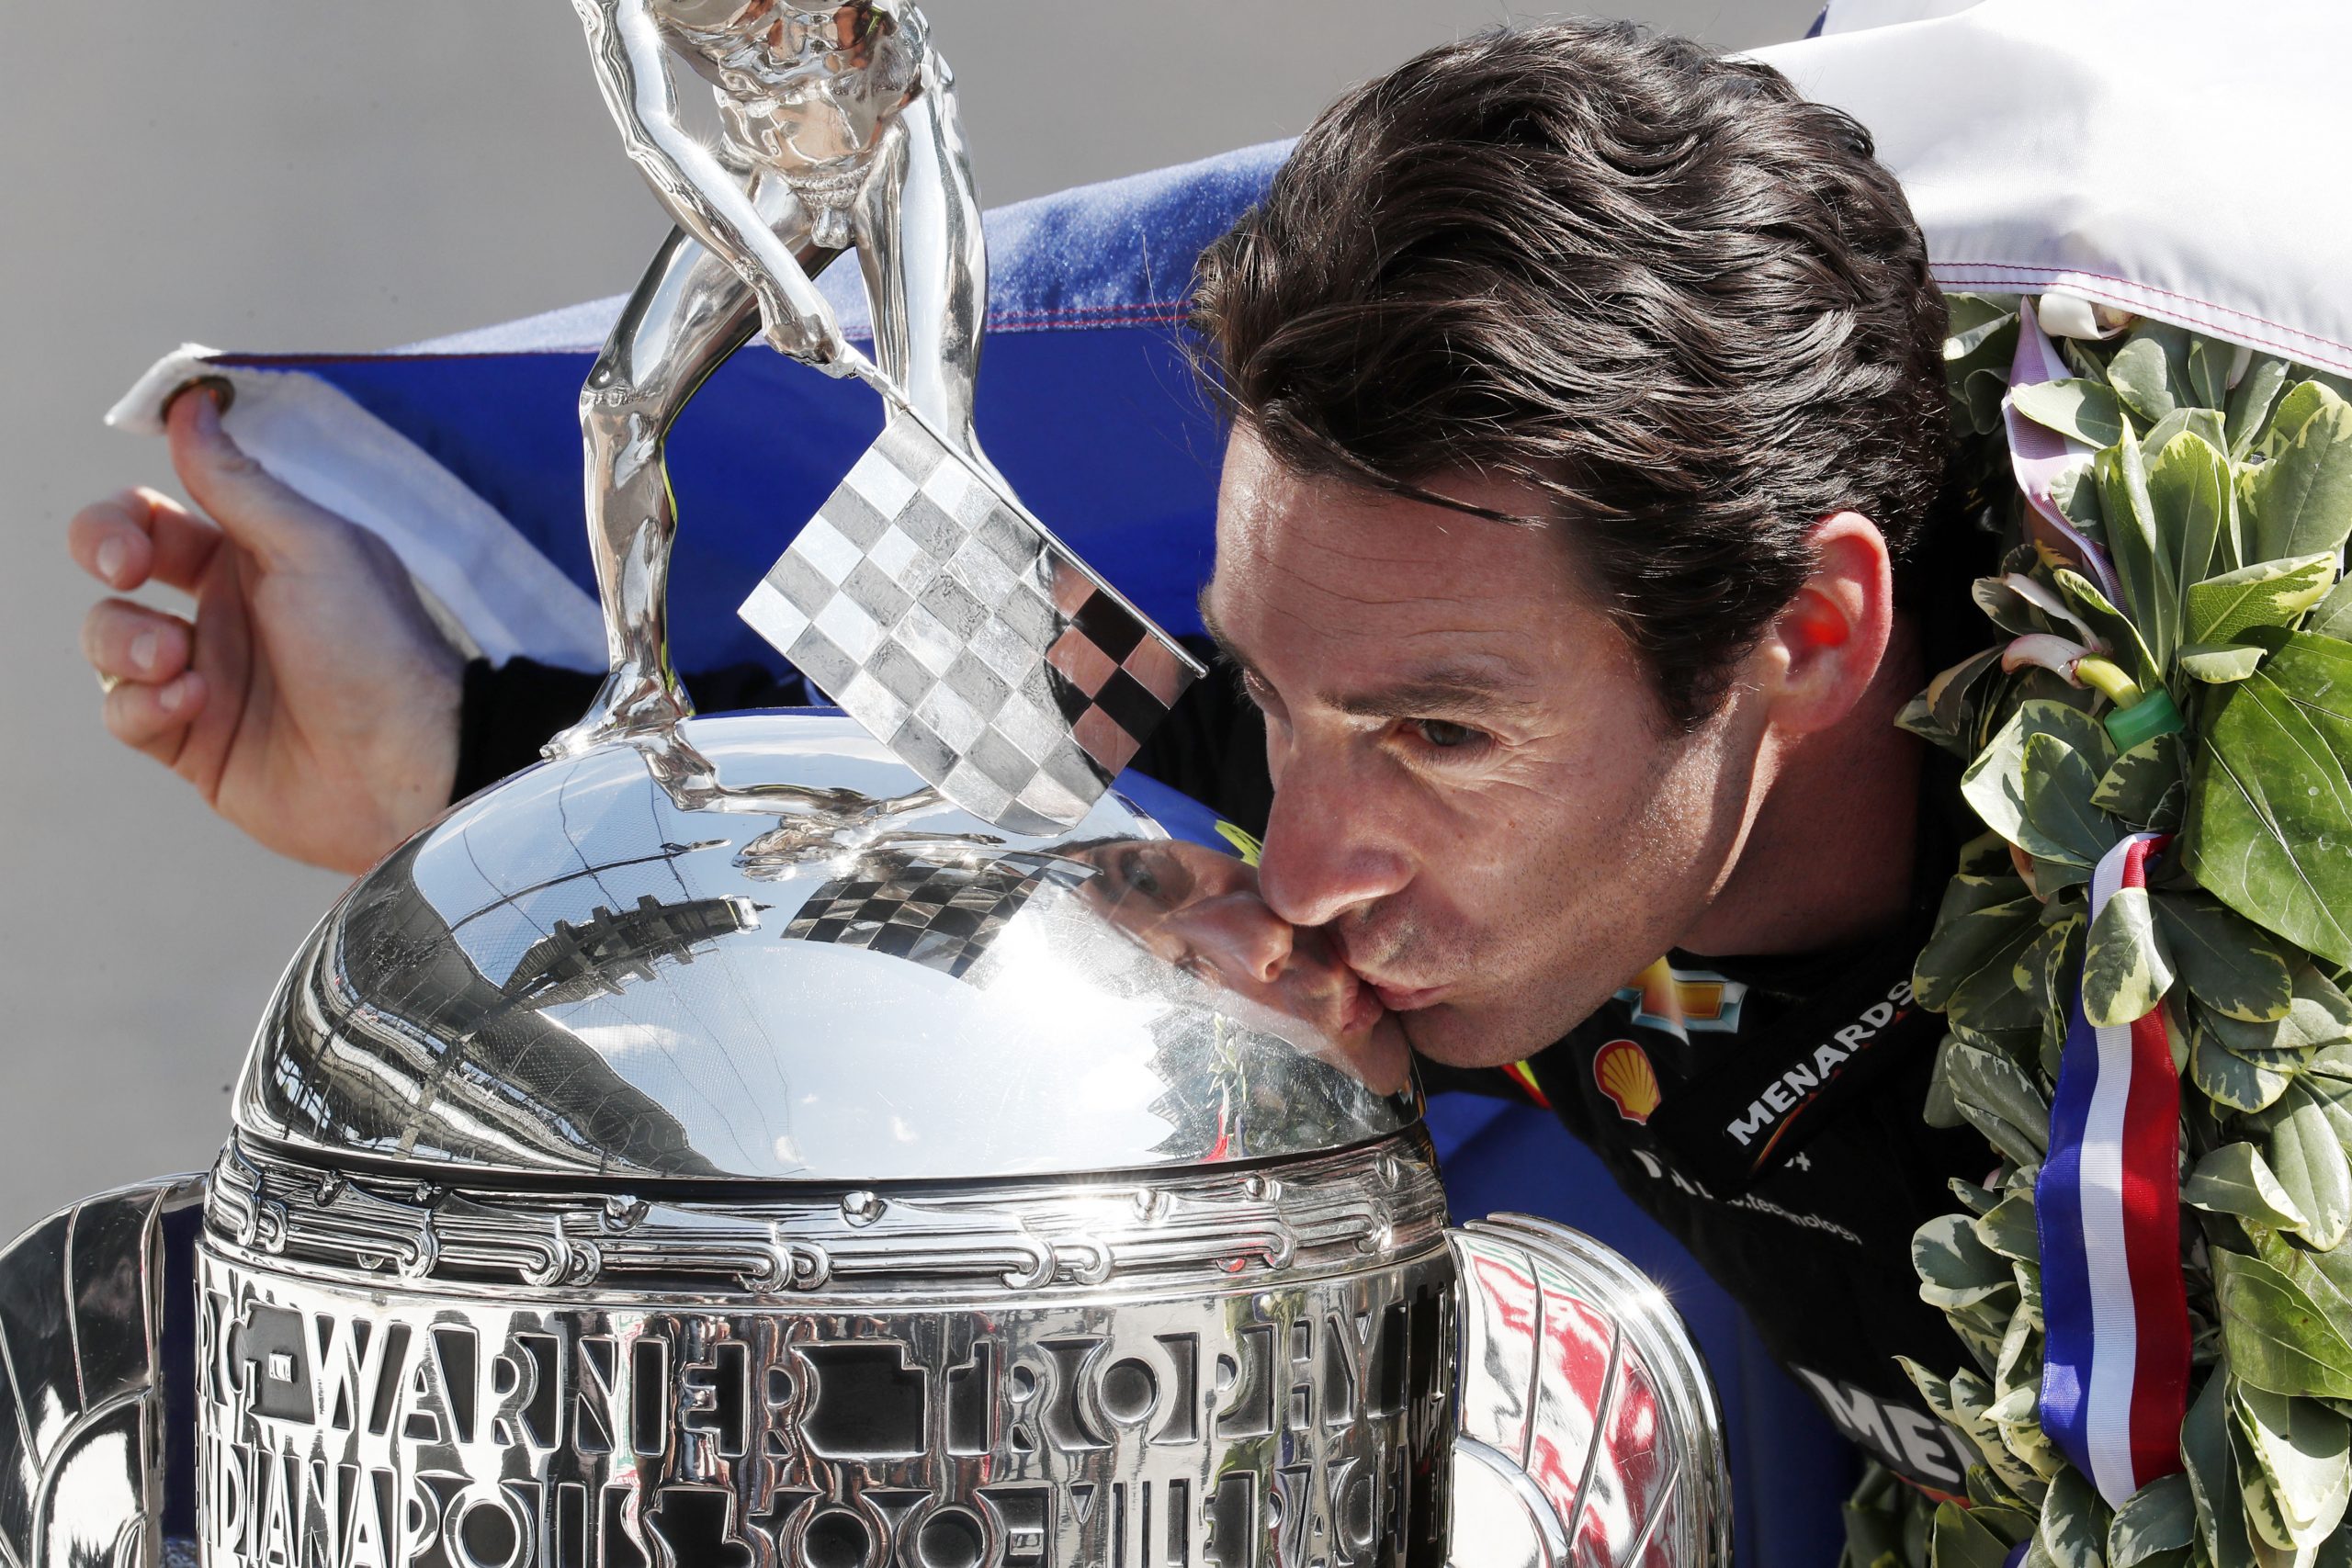 IndyCar: 103rd Running of the Indianapolis 500-Winner Portraits